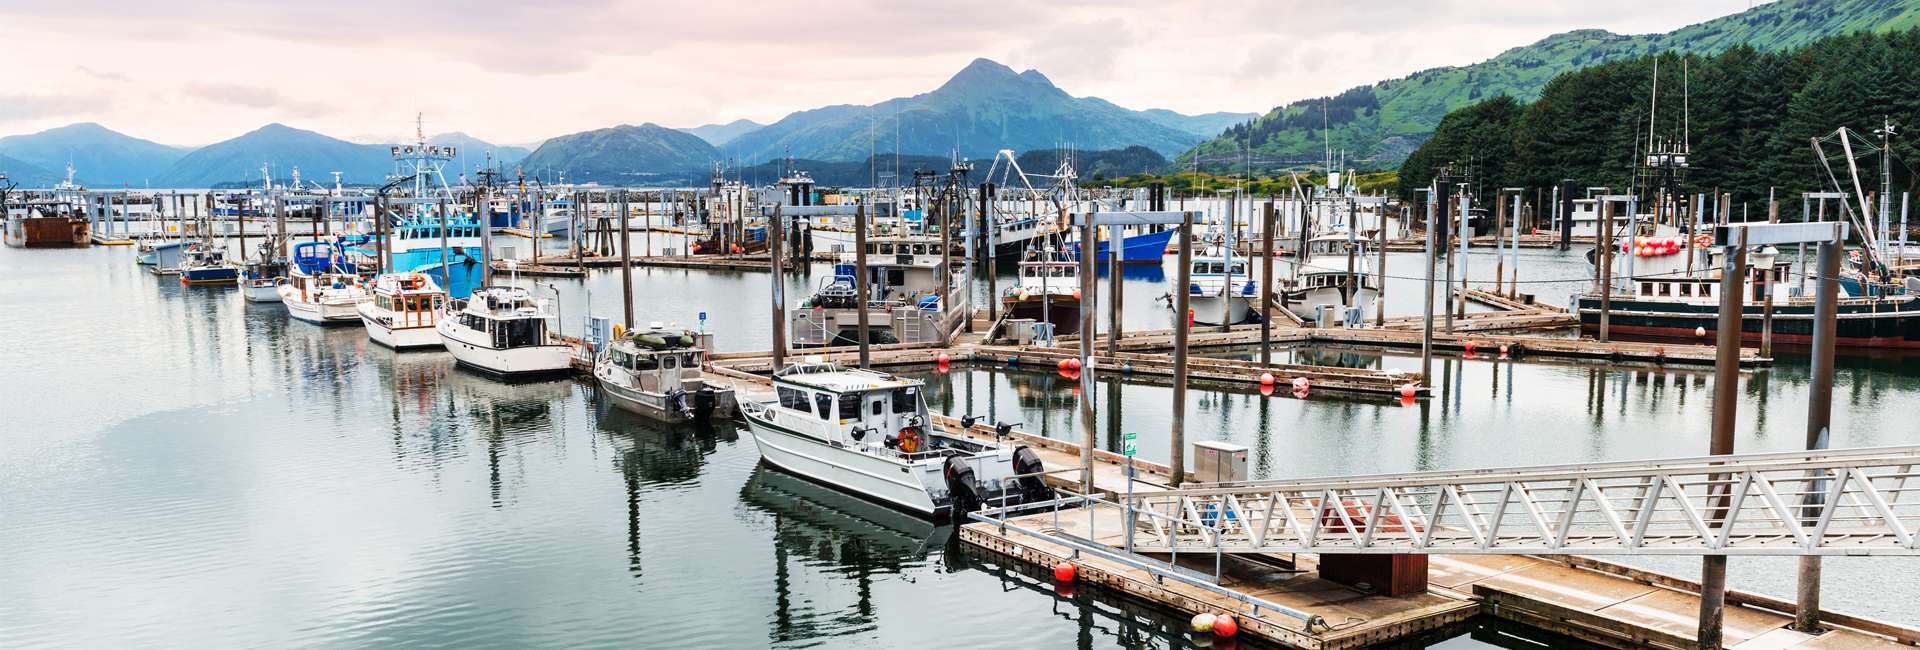 Boats in Kodiak, Alaska fishing harbor with mountains in thebackground